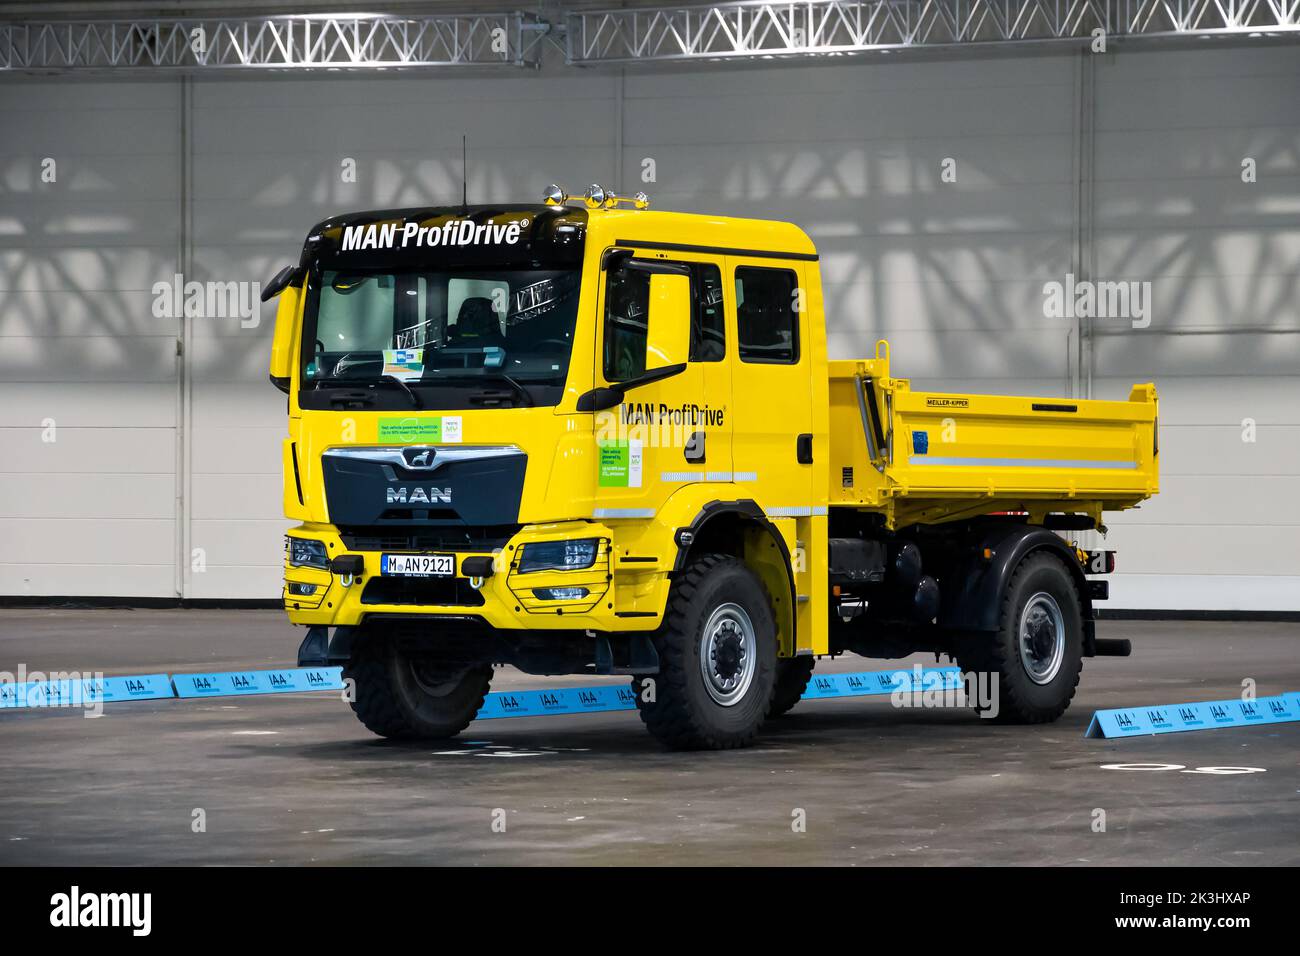 MAN truck powered with HVO100 (Hydrotreated Vegetable Oil) test vehicle at the Hannover IAA Transportation Motor Show. Germany - September 20, 2022 Stock Photo